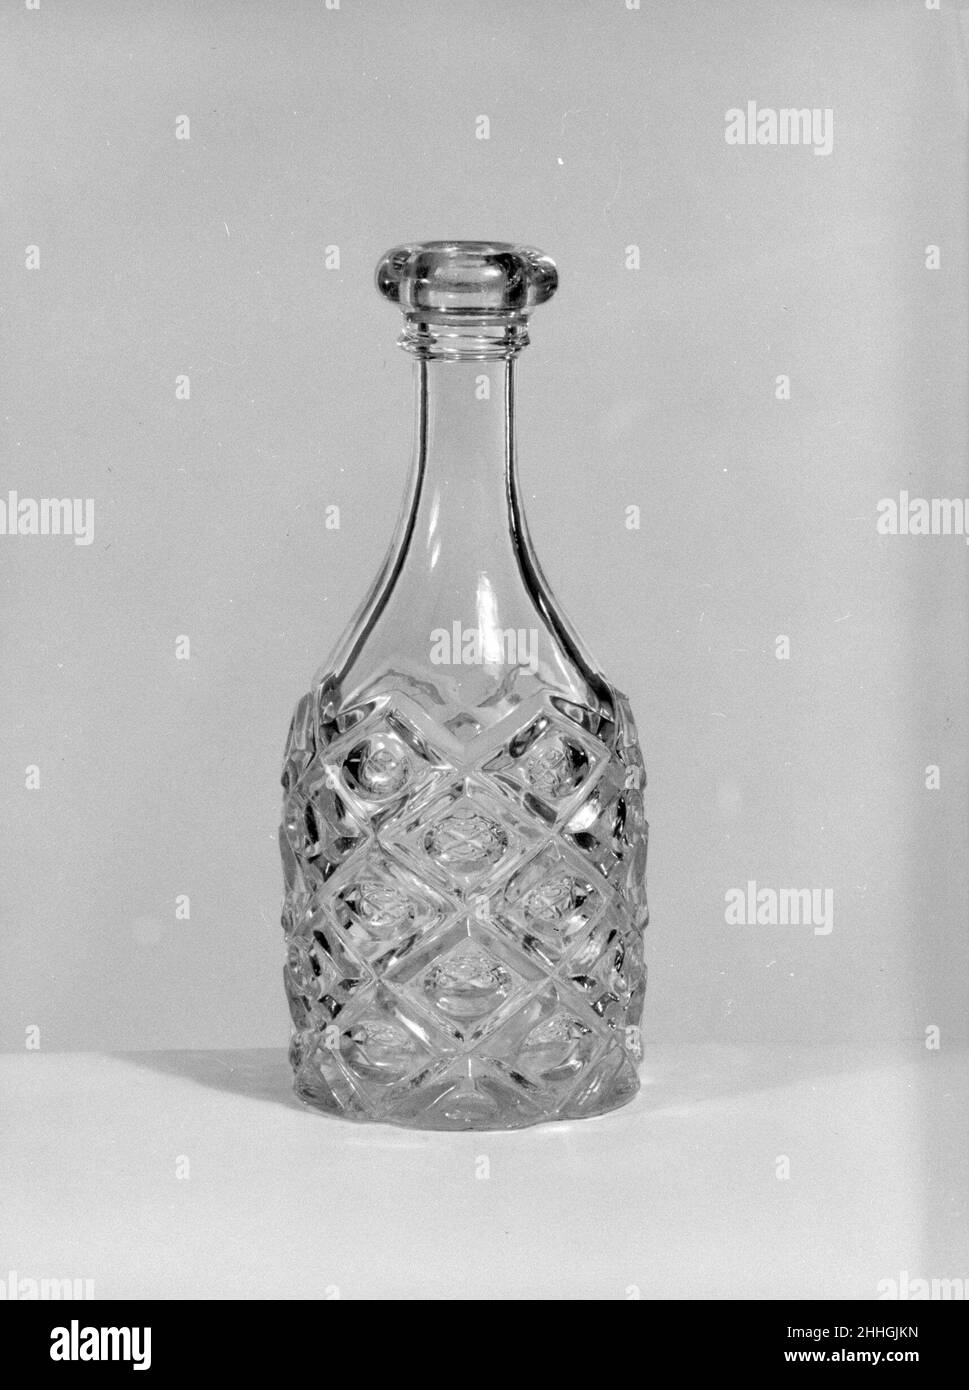 Half-pint Decanter 1850–70 American With the development of new formulas and techniques, glass-pressing technology had improved markedly by the late 1840s. By this time, pressed tablewares were being produced in large matching sets and innumerable forms. During the mid-1850s, colorless glass and simple geometric patterns dominated. Catering to the demand for moderately-priced dining wares, the glass industry in the United States expanded widely, and numerous factories supplied less expensive pressed glassware to the growing market. At the Exhibition of the Industry of All Nations at New York’s Stock Photo